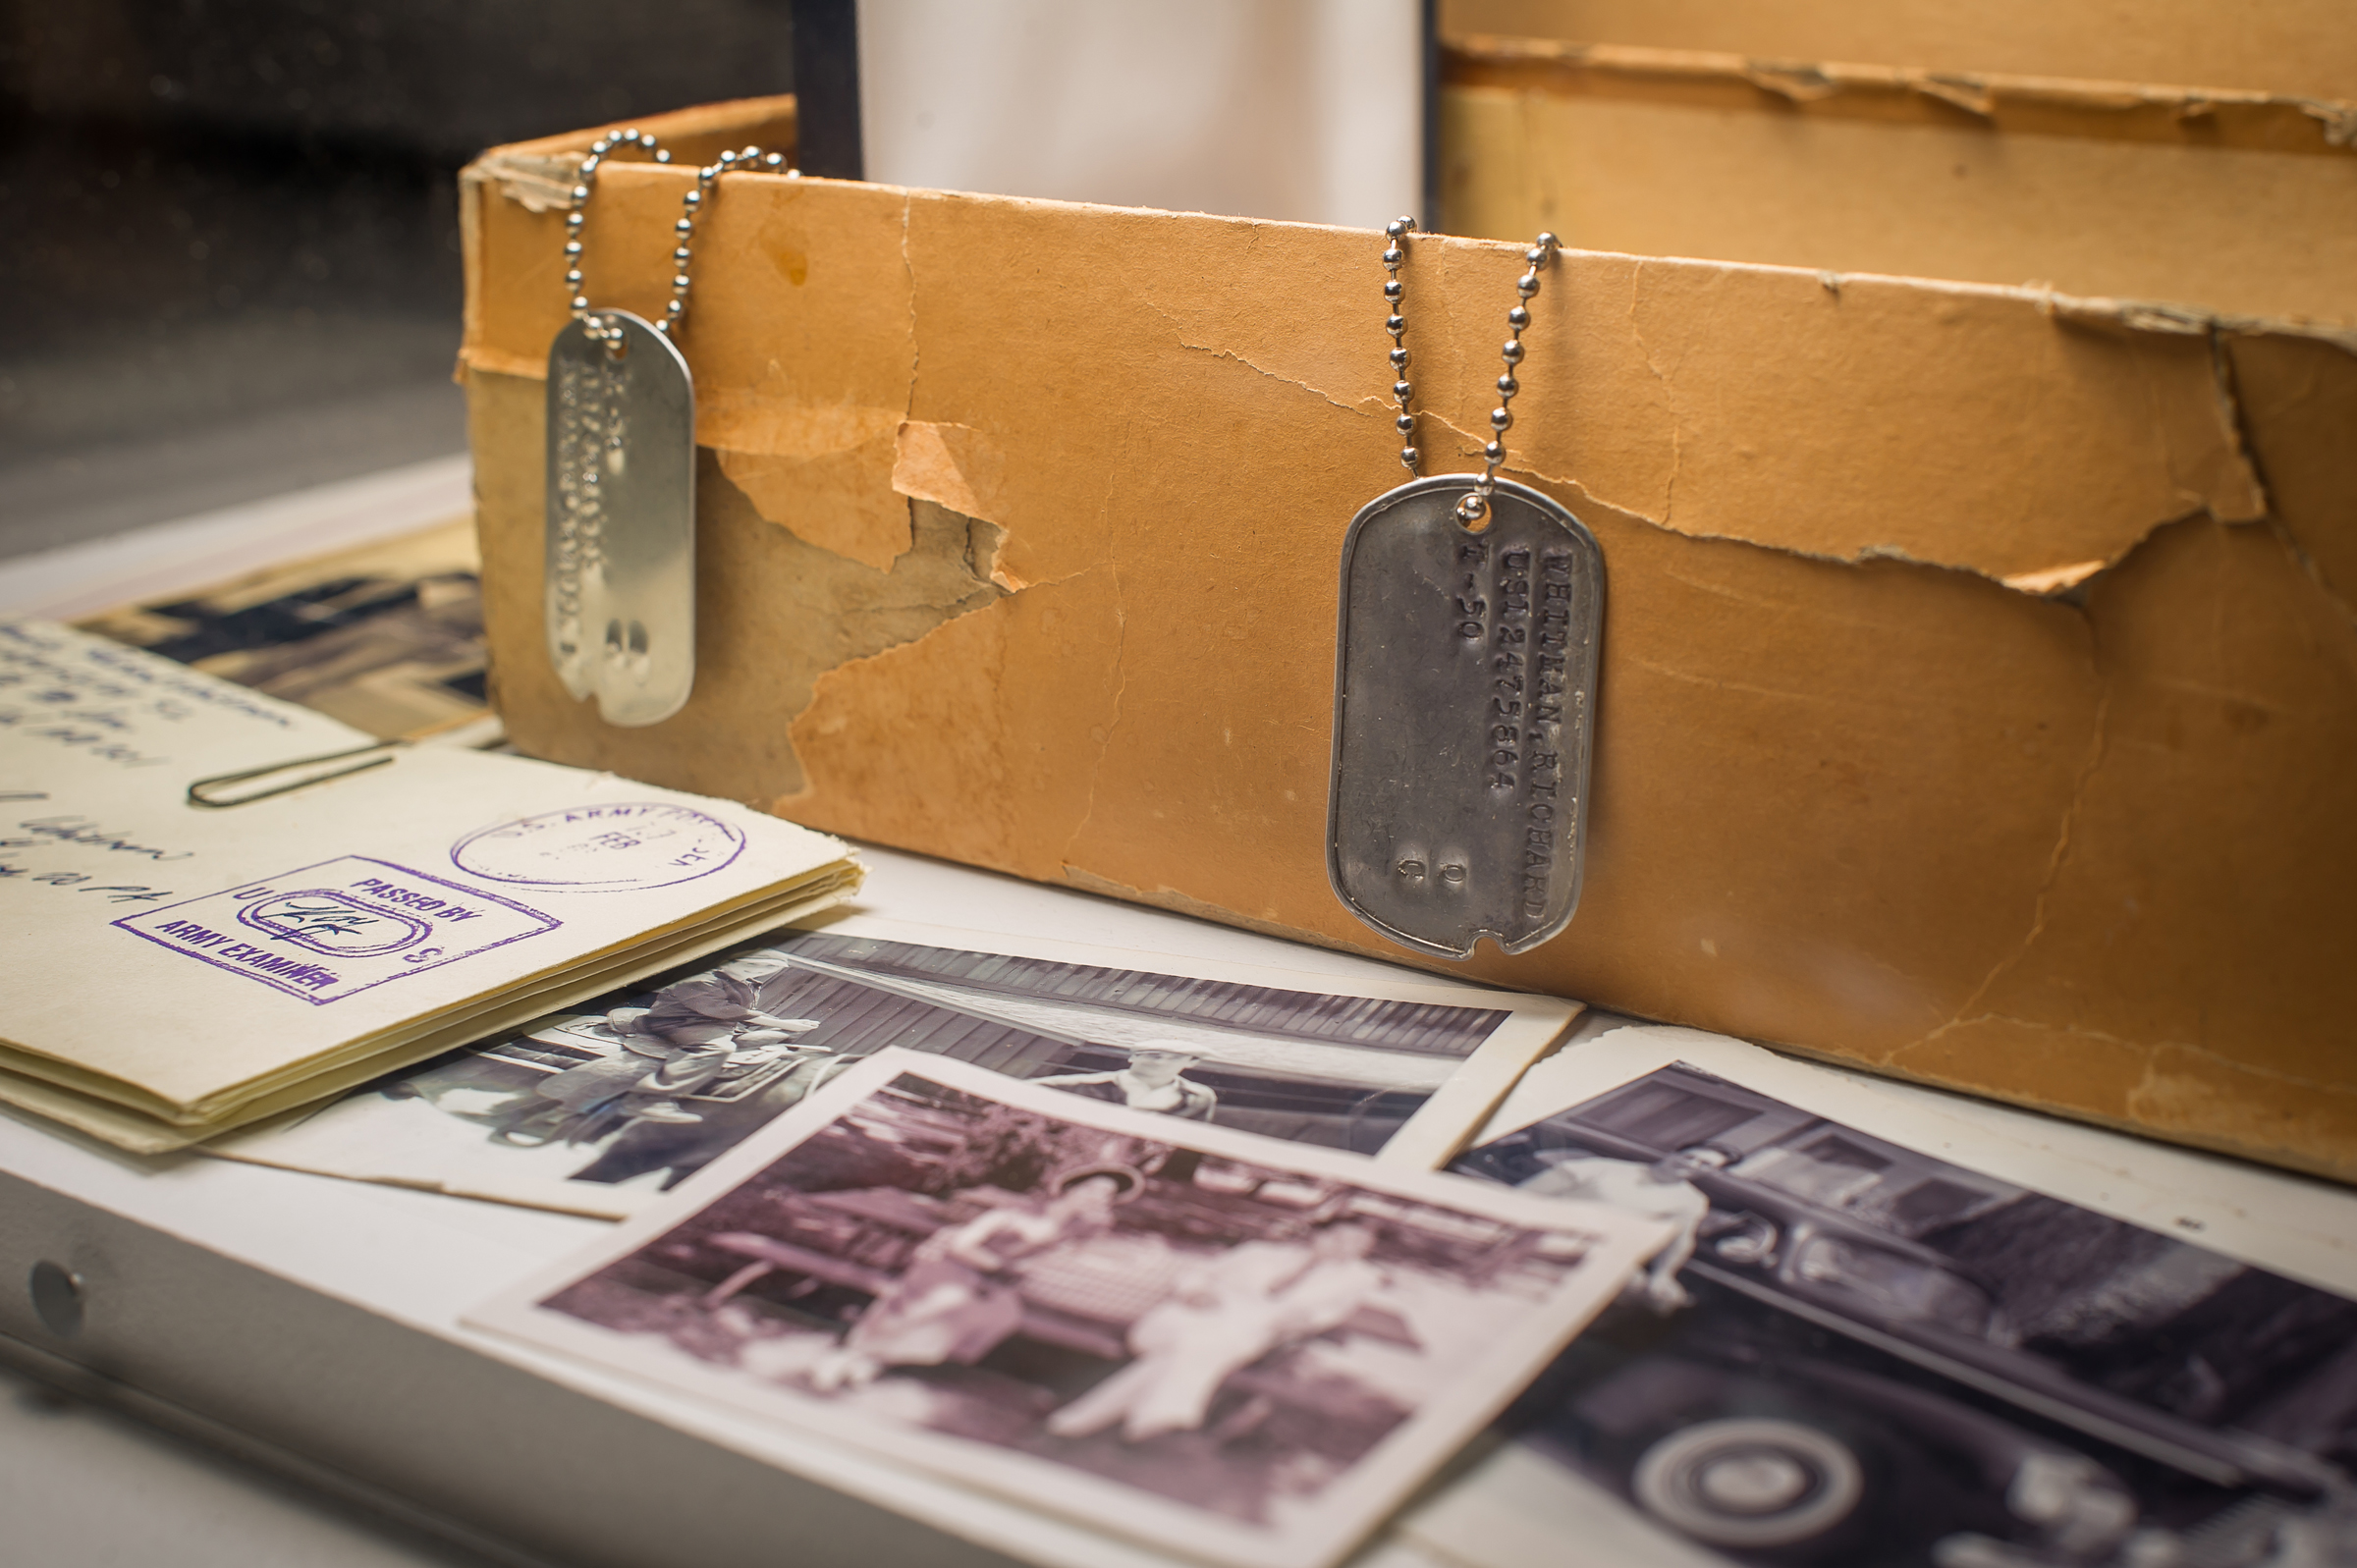 PHOTO: In this March 10, 2015, photo, character Don Draper's box of secrets, including Dick Whitman's dog tag, letters and family photos are displayed as part of the exhibition, "Matthew Weiner's Mad Men," at the Museum of the Moving Image in New York.